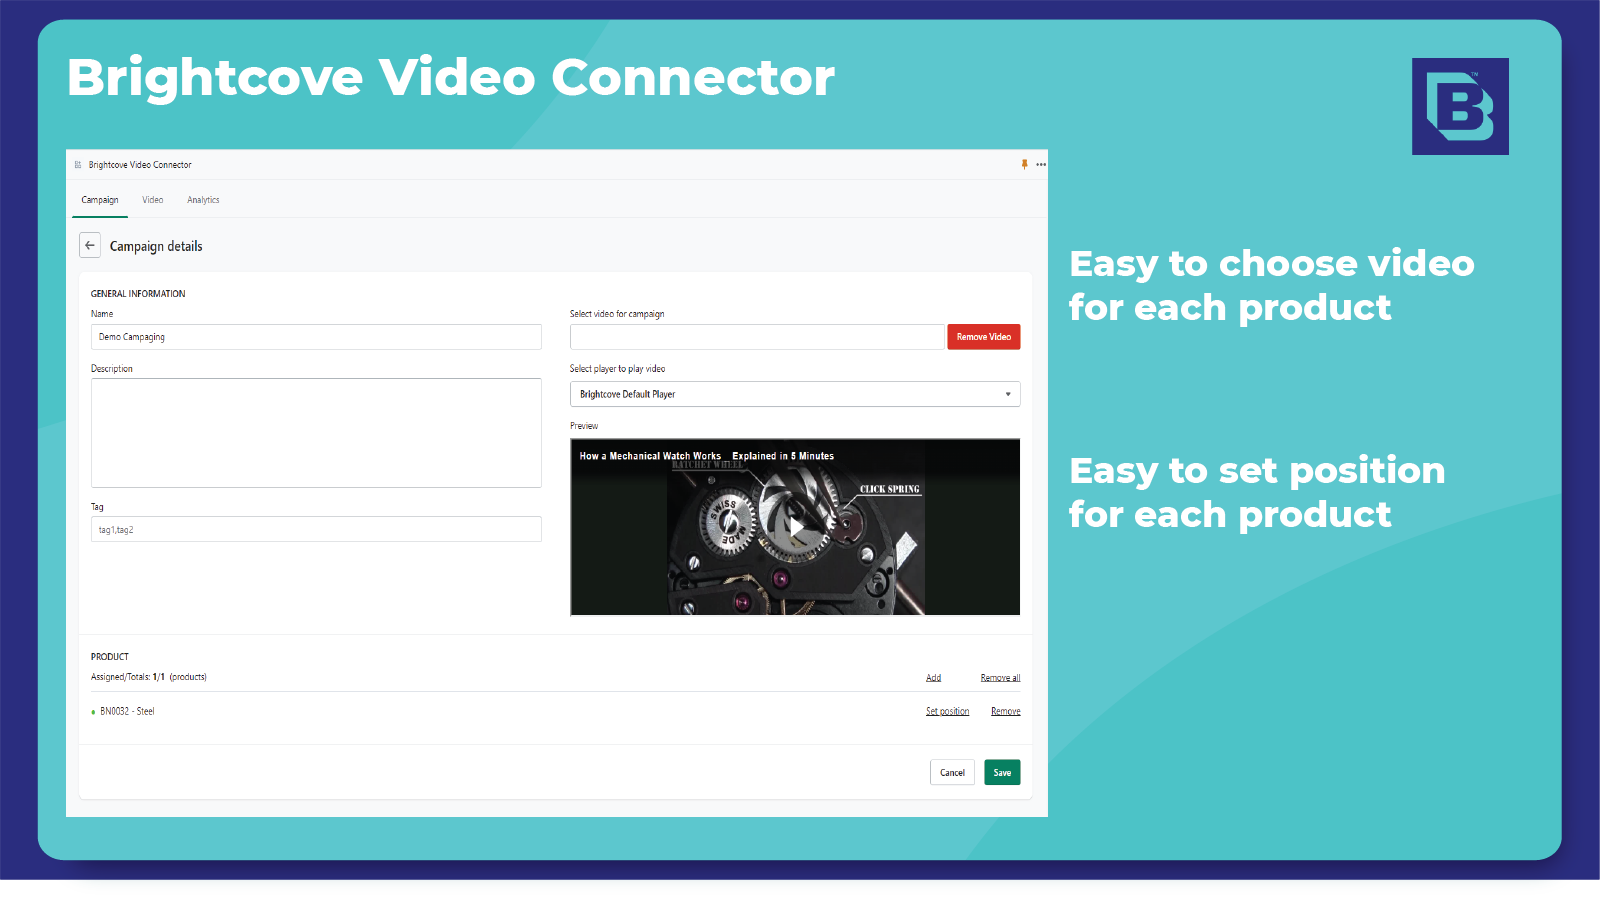 Easy to choose video and set position for each product